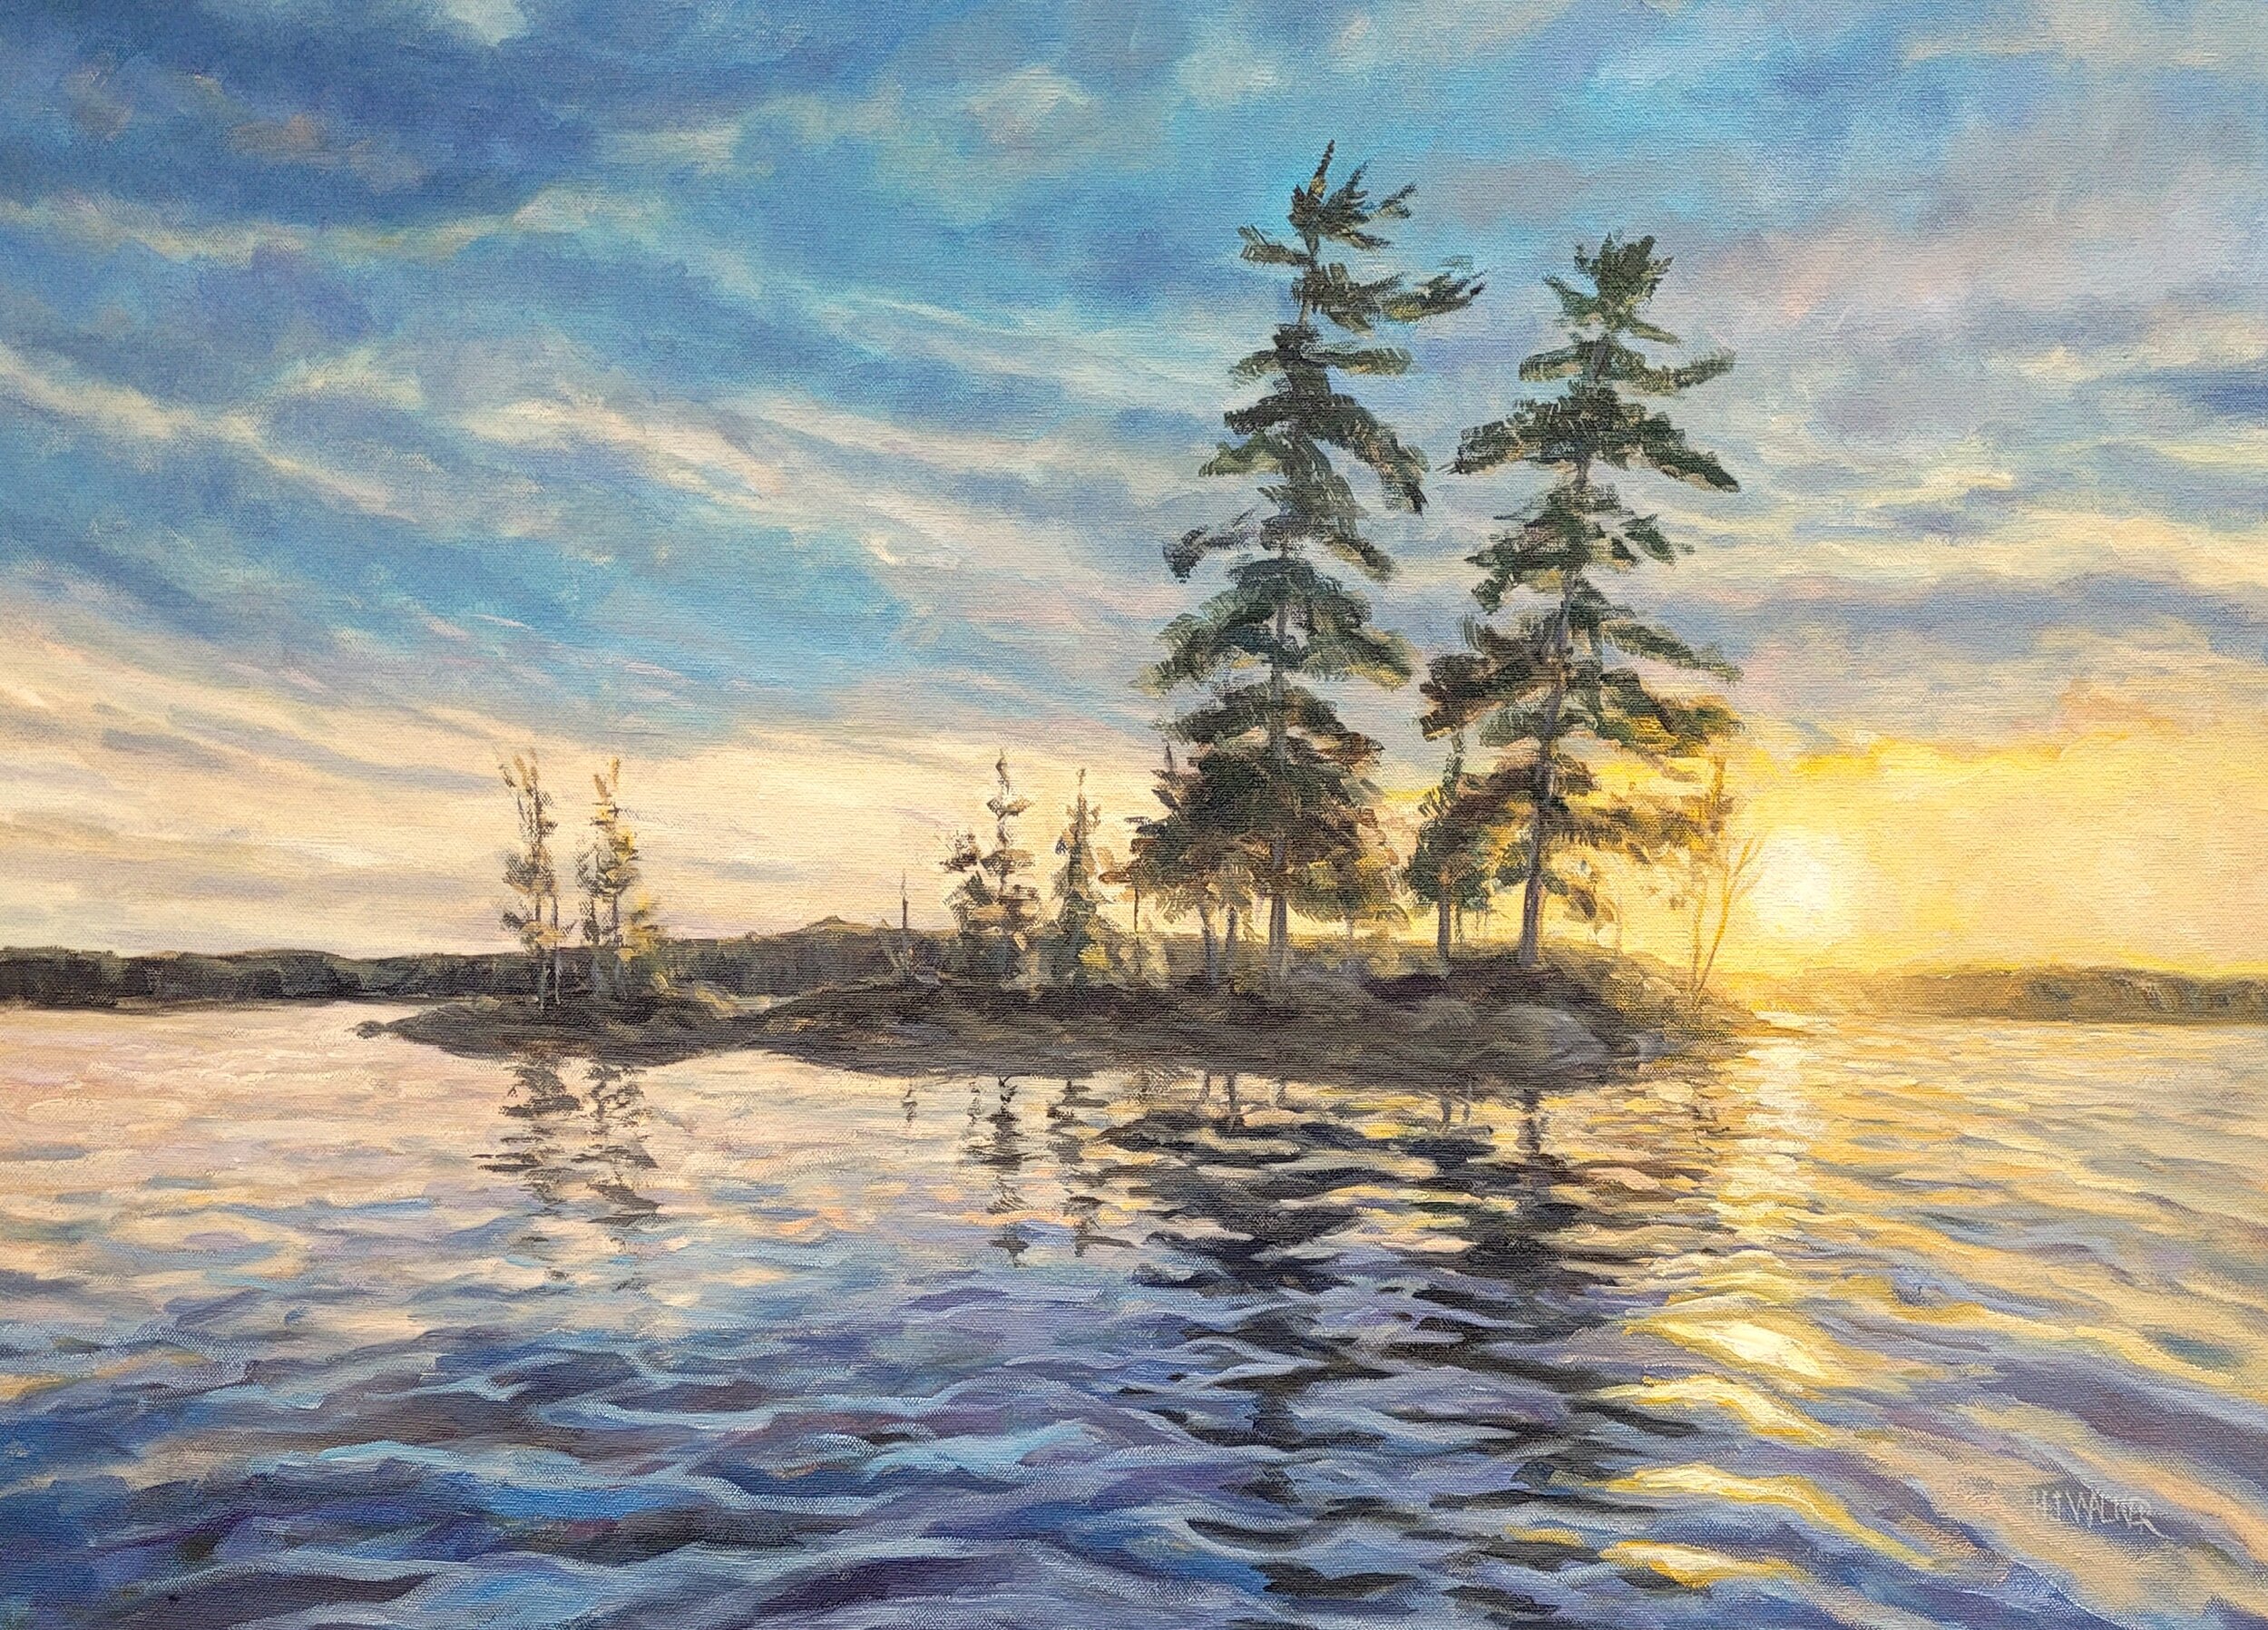 Tranquility Island, SOLD